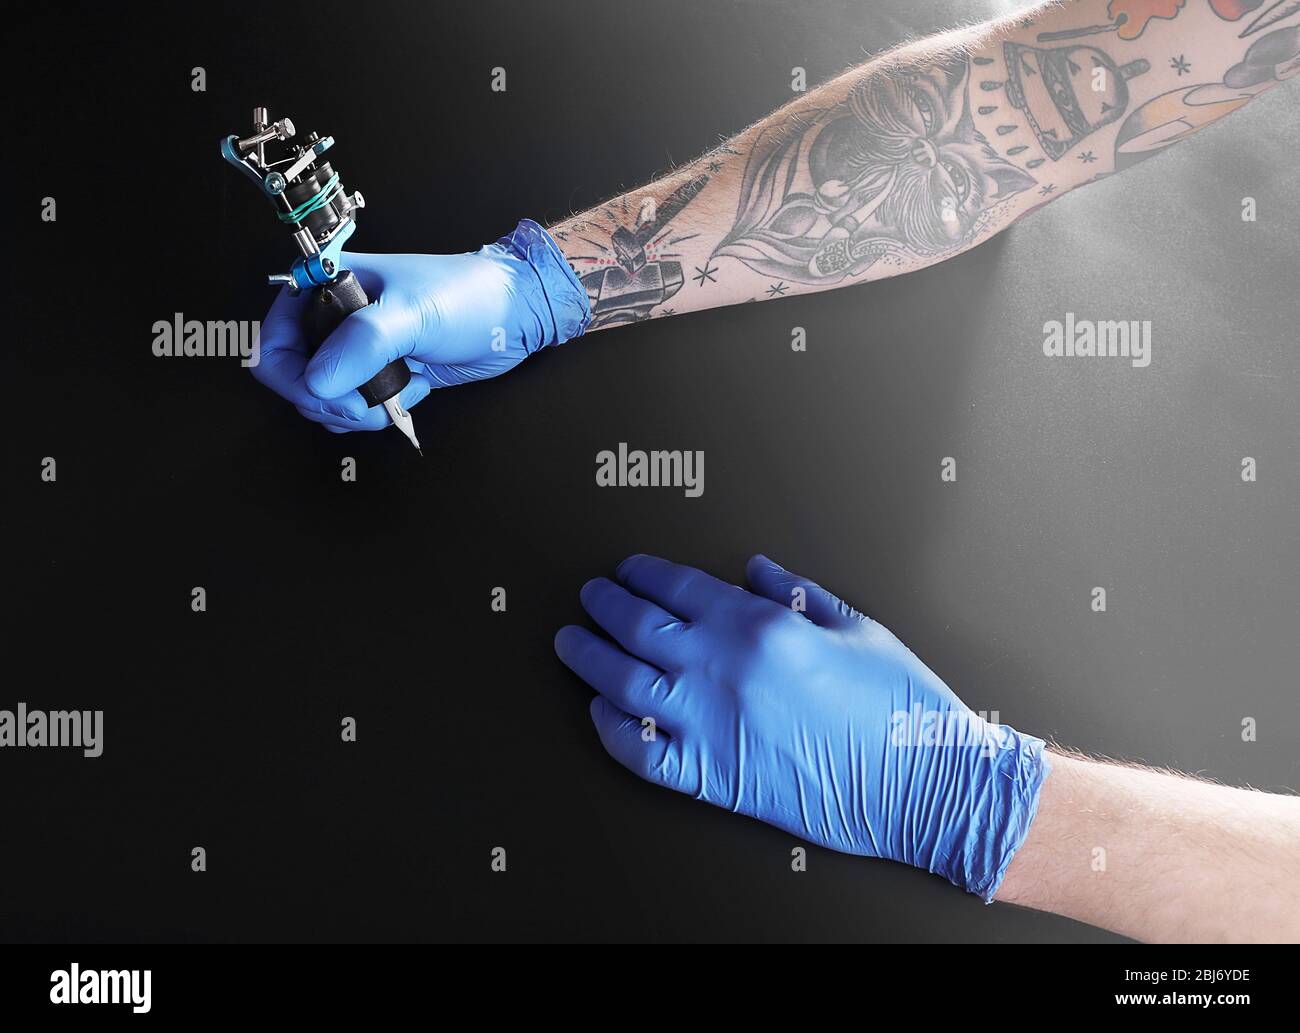 Tattooist hands in blue gloves with tattoo machine on black background Stock Photo - Alamy